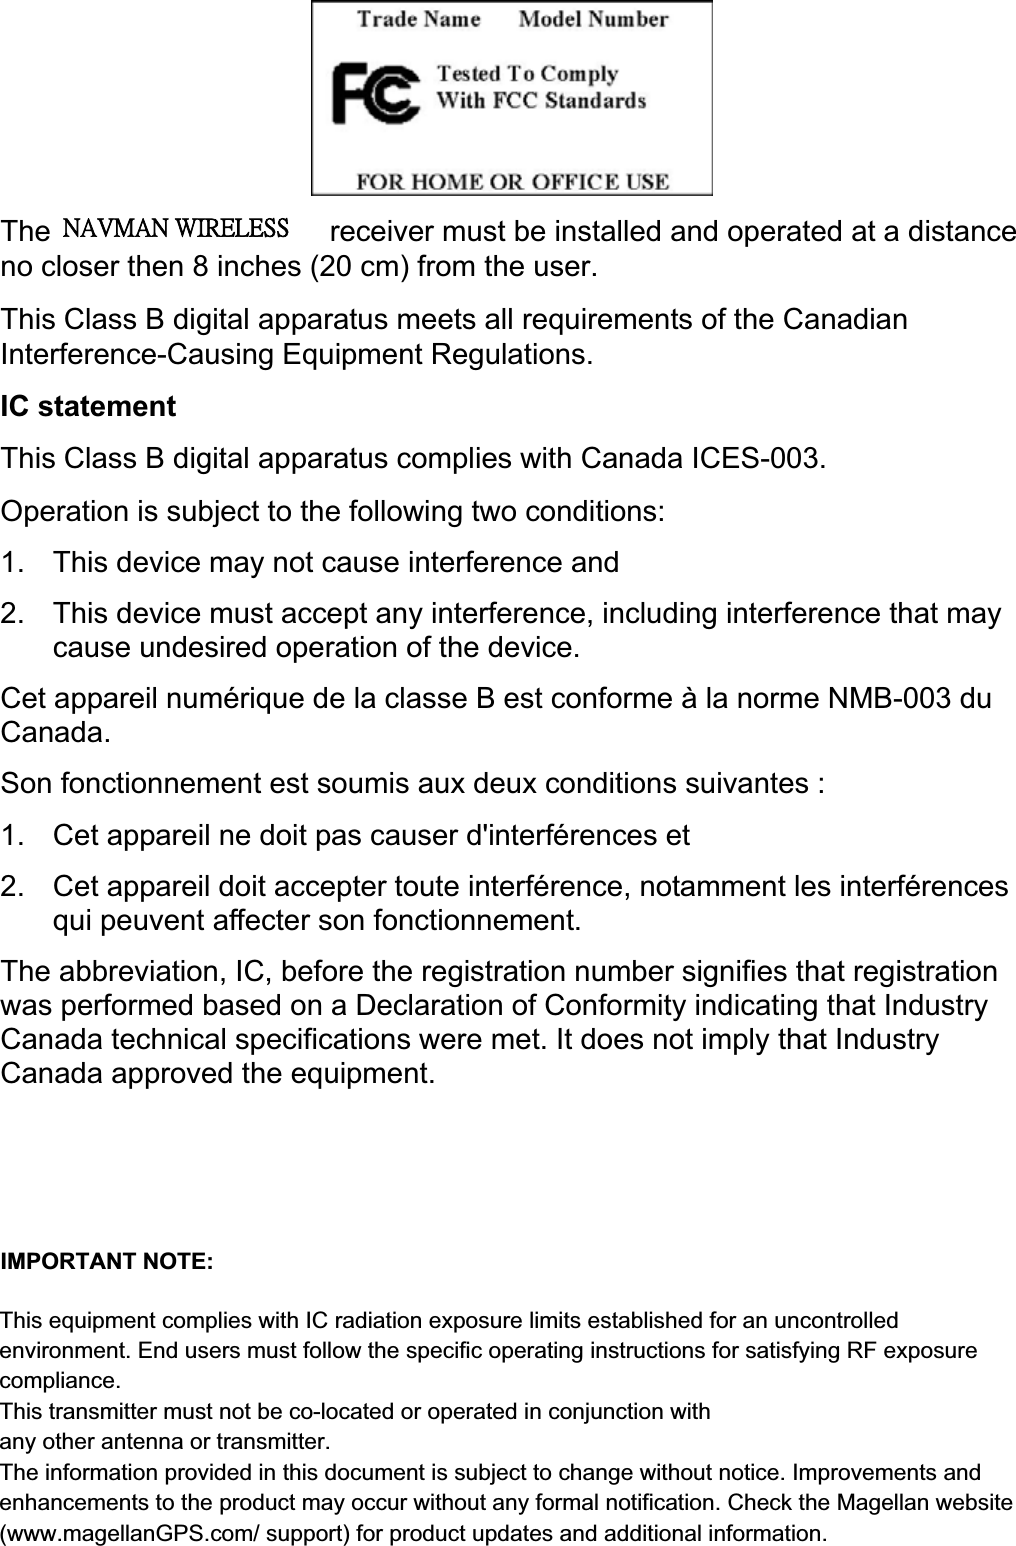 vThe Magellan RoadMate receiver must be installed and operated at a distance no closer then 8 inches (20 cm) from the user.   This Class B digital apparatus meets all requirements of the Canadian Interference-Causing Equipment Regulations.   IC statement This Class B digital apparatus complies with Canada ICES-003. Operation is subject to the following two conditions:   1.  This device may not cause interference and   2.  This device must accept any interference, including interference that may cause undesired operation of the device.   Cet appareil numérique de la classe B est conforme à la norme NMB-003 du Canada. Son fonctionnement est soumis aux deux conditions suivantes : 1.  Cet appareil ne doit pas causer d&apos;interférences et 2.  Cet appareil doit accepter toute interférence, notamment les interférences qui peuvent affecter son fonctionnement. The abbreviation, IC, before the registration number signifies that registration was performed based on a Declaration of Conformity indicating that Industry Canada technical specifications were met. It does not imply that Industry Canada approved the equipment.   To prevent radio interference to the licensed service, this device is intended to be operated indoors and away from windows to provide maximum shielding. Equipment (or its transmit antenna) that is installed outdoors is subject to licensing.IMPORTANT NOTE: IC Radiation Exposure Statement: This equipment complies with IC radiation exposure limits established for an uncontrolled environment. End users must follow the specific operating instructions for satisfying RF exposure compliance.   ˡ˔˩ˠ˔ˡʳ˪˜˥˘˟˘˦˦This equipment complies with IC radiation exposure limits established for an uncontrolled environment. End users must follow the specific operating instructions for satisfying RF exposure compliance.This transmitter must not be co-located or operated in conjunction withany other antenna or transmitter.The information provided in this document is subject to change without notice. Improvements and enhancements to the product may occur without any formal notification. Check the Magellan website(www.magellanGPS.com/ support) for product updates and additional information.IMPORTANT NOTE:    